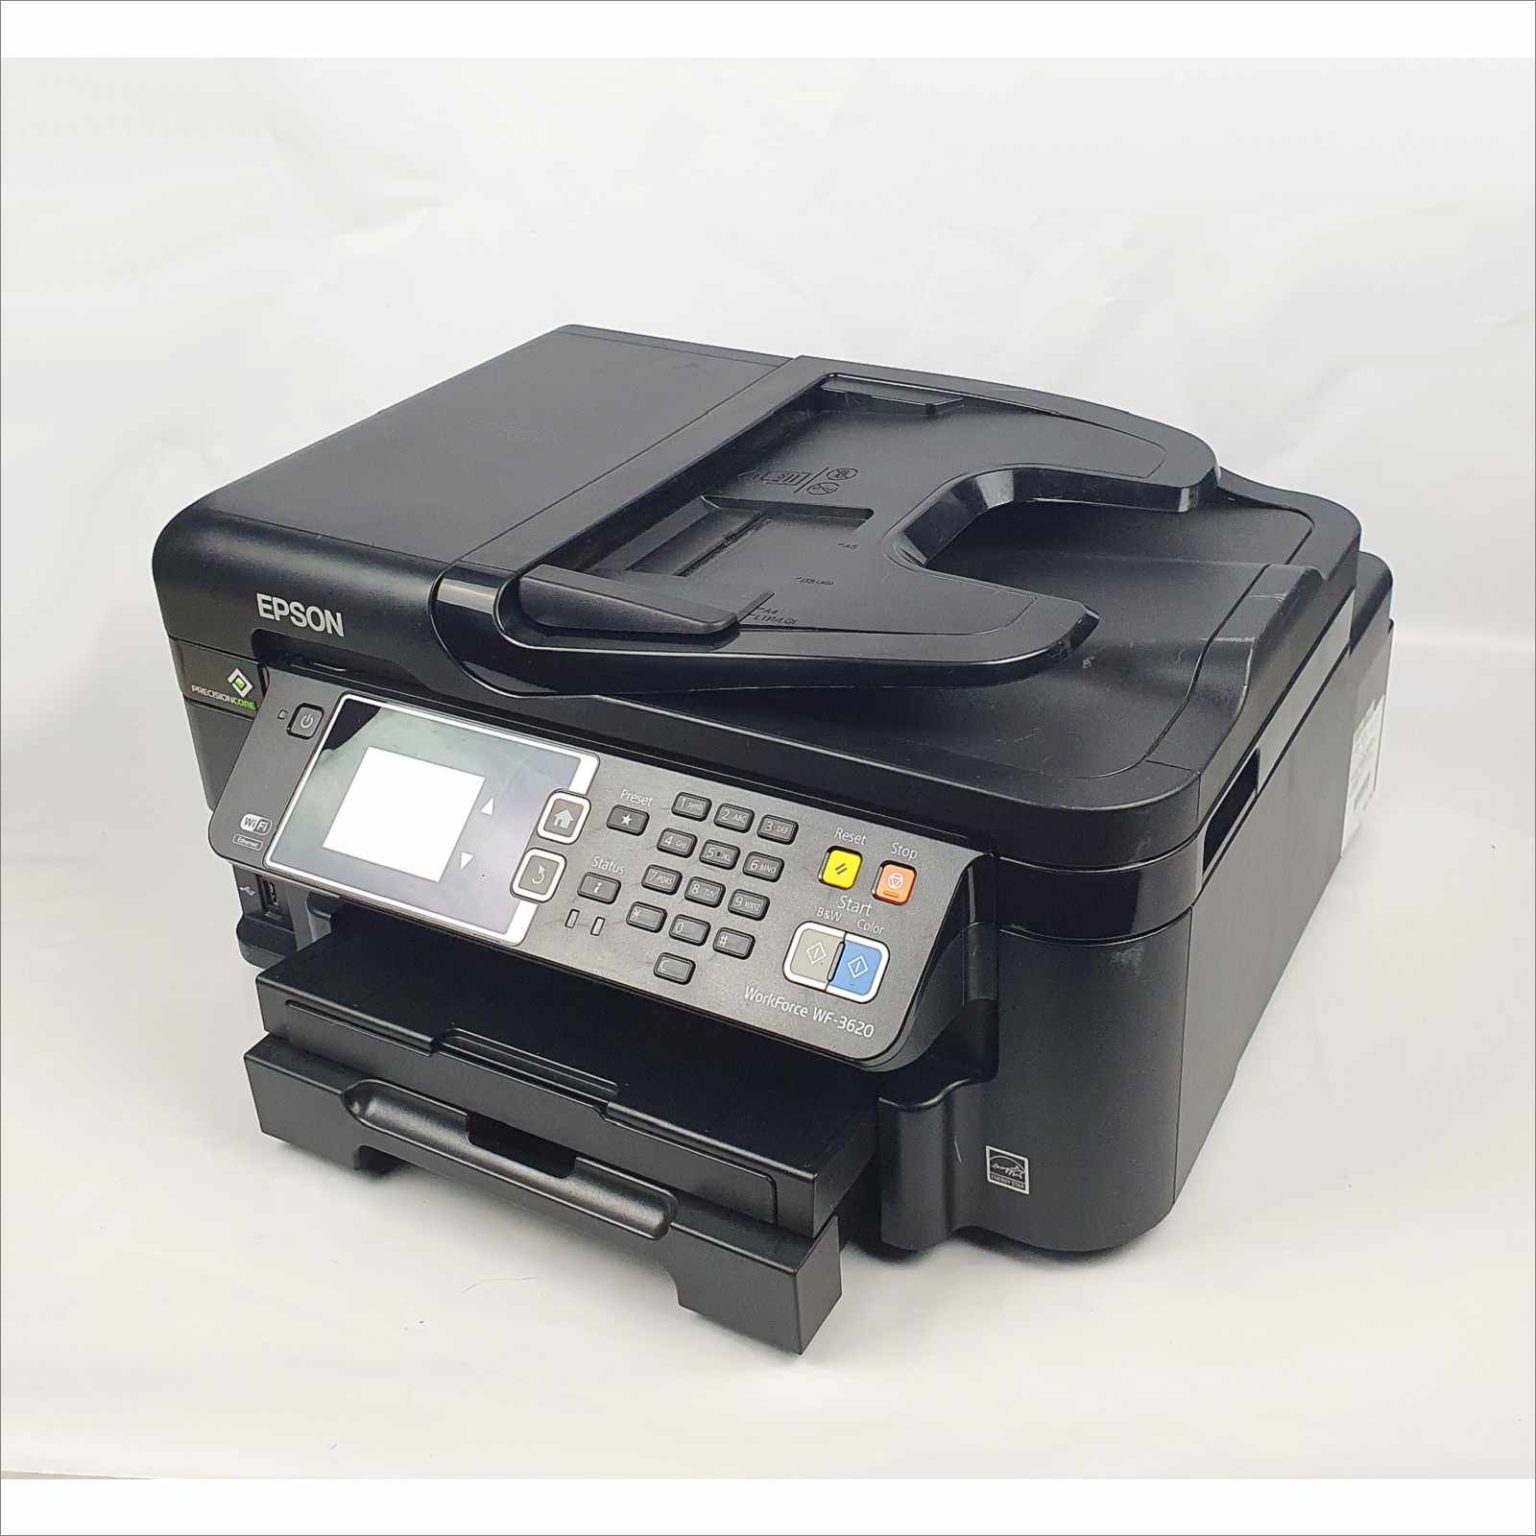 Epson Workforce Wf 3620 All In One Printer Fast Scanner C481d Computer Network Telecom 6094